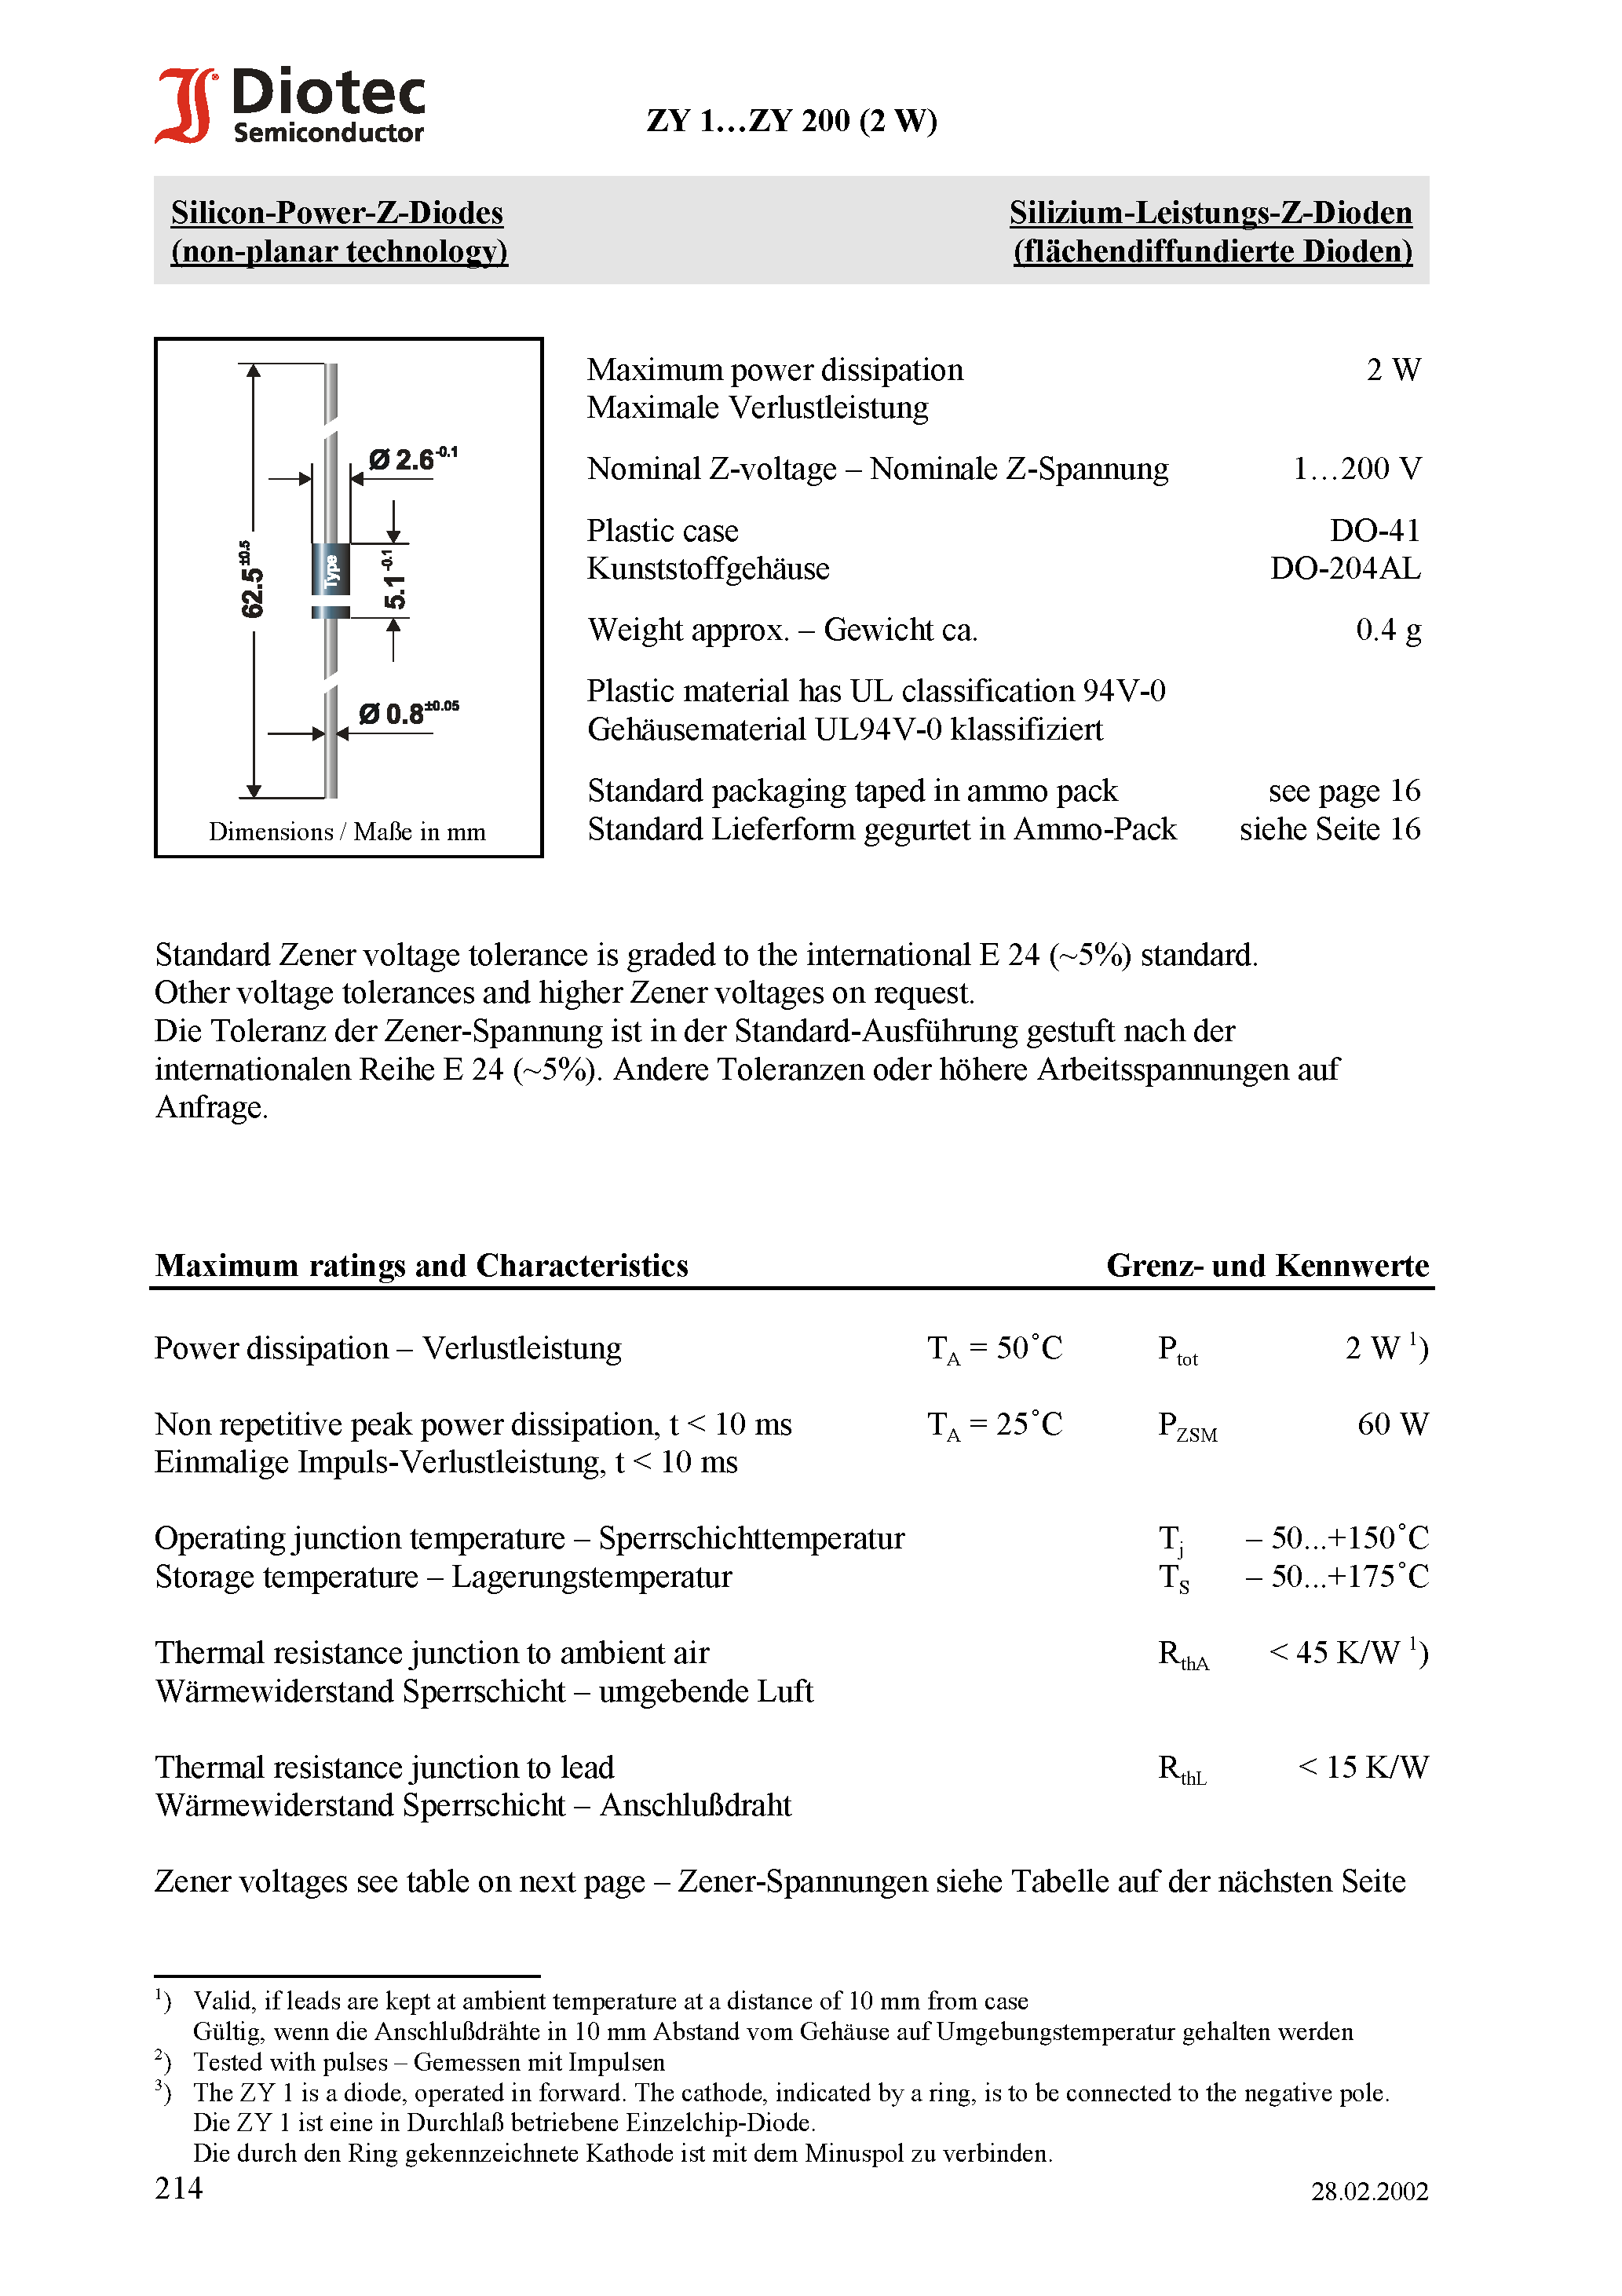 Datasheet ZY62 - Silicon-Power-Z-Diodes (non-planar technology) page 1